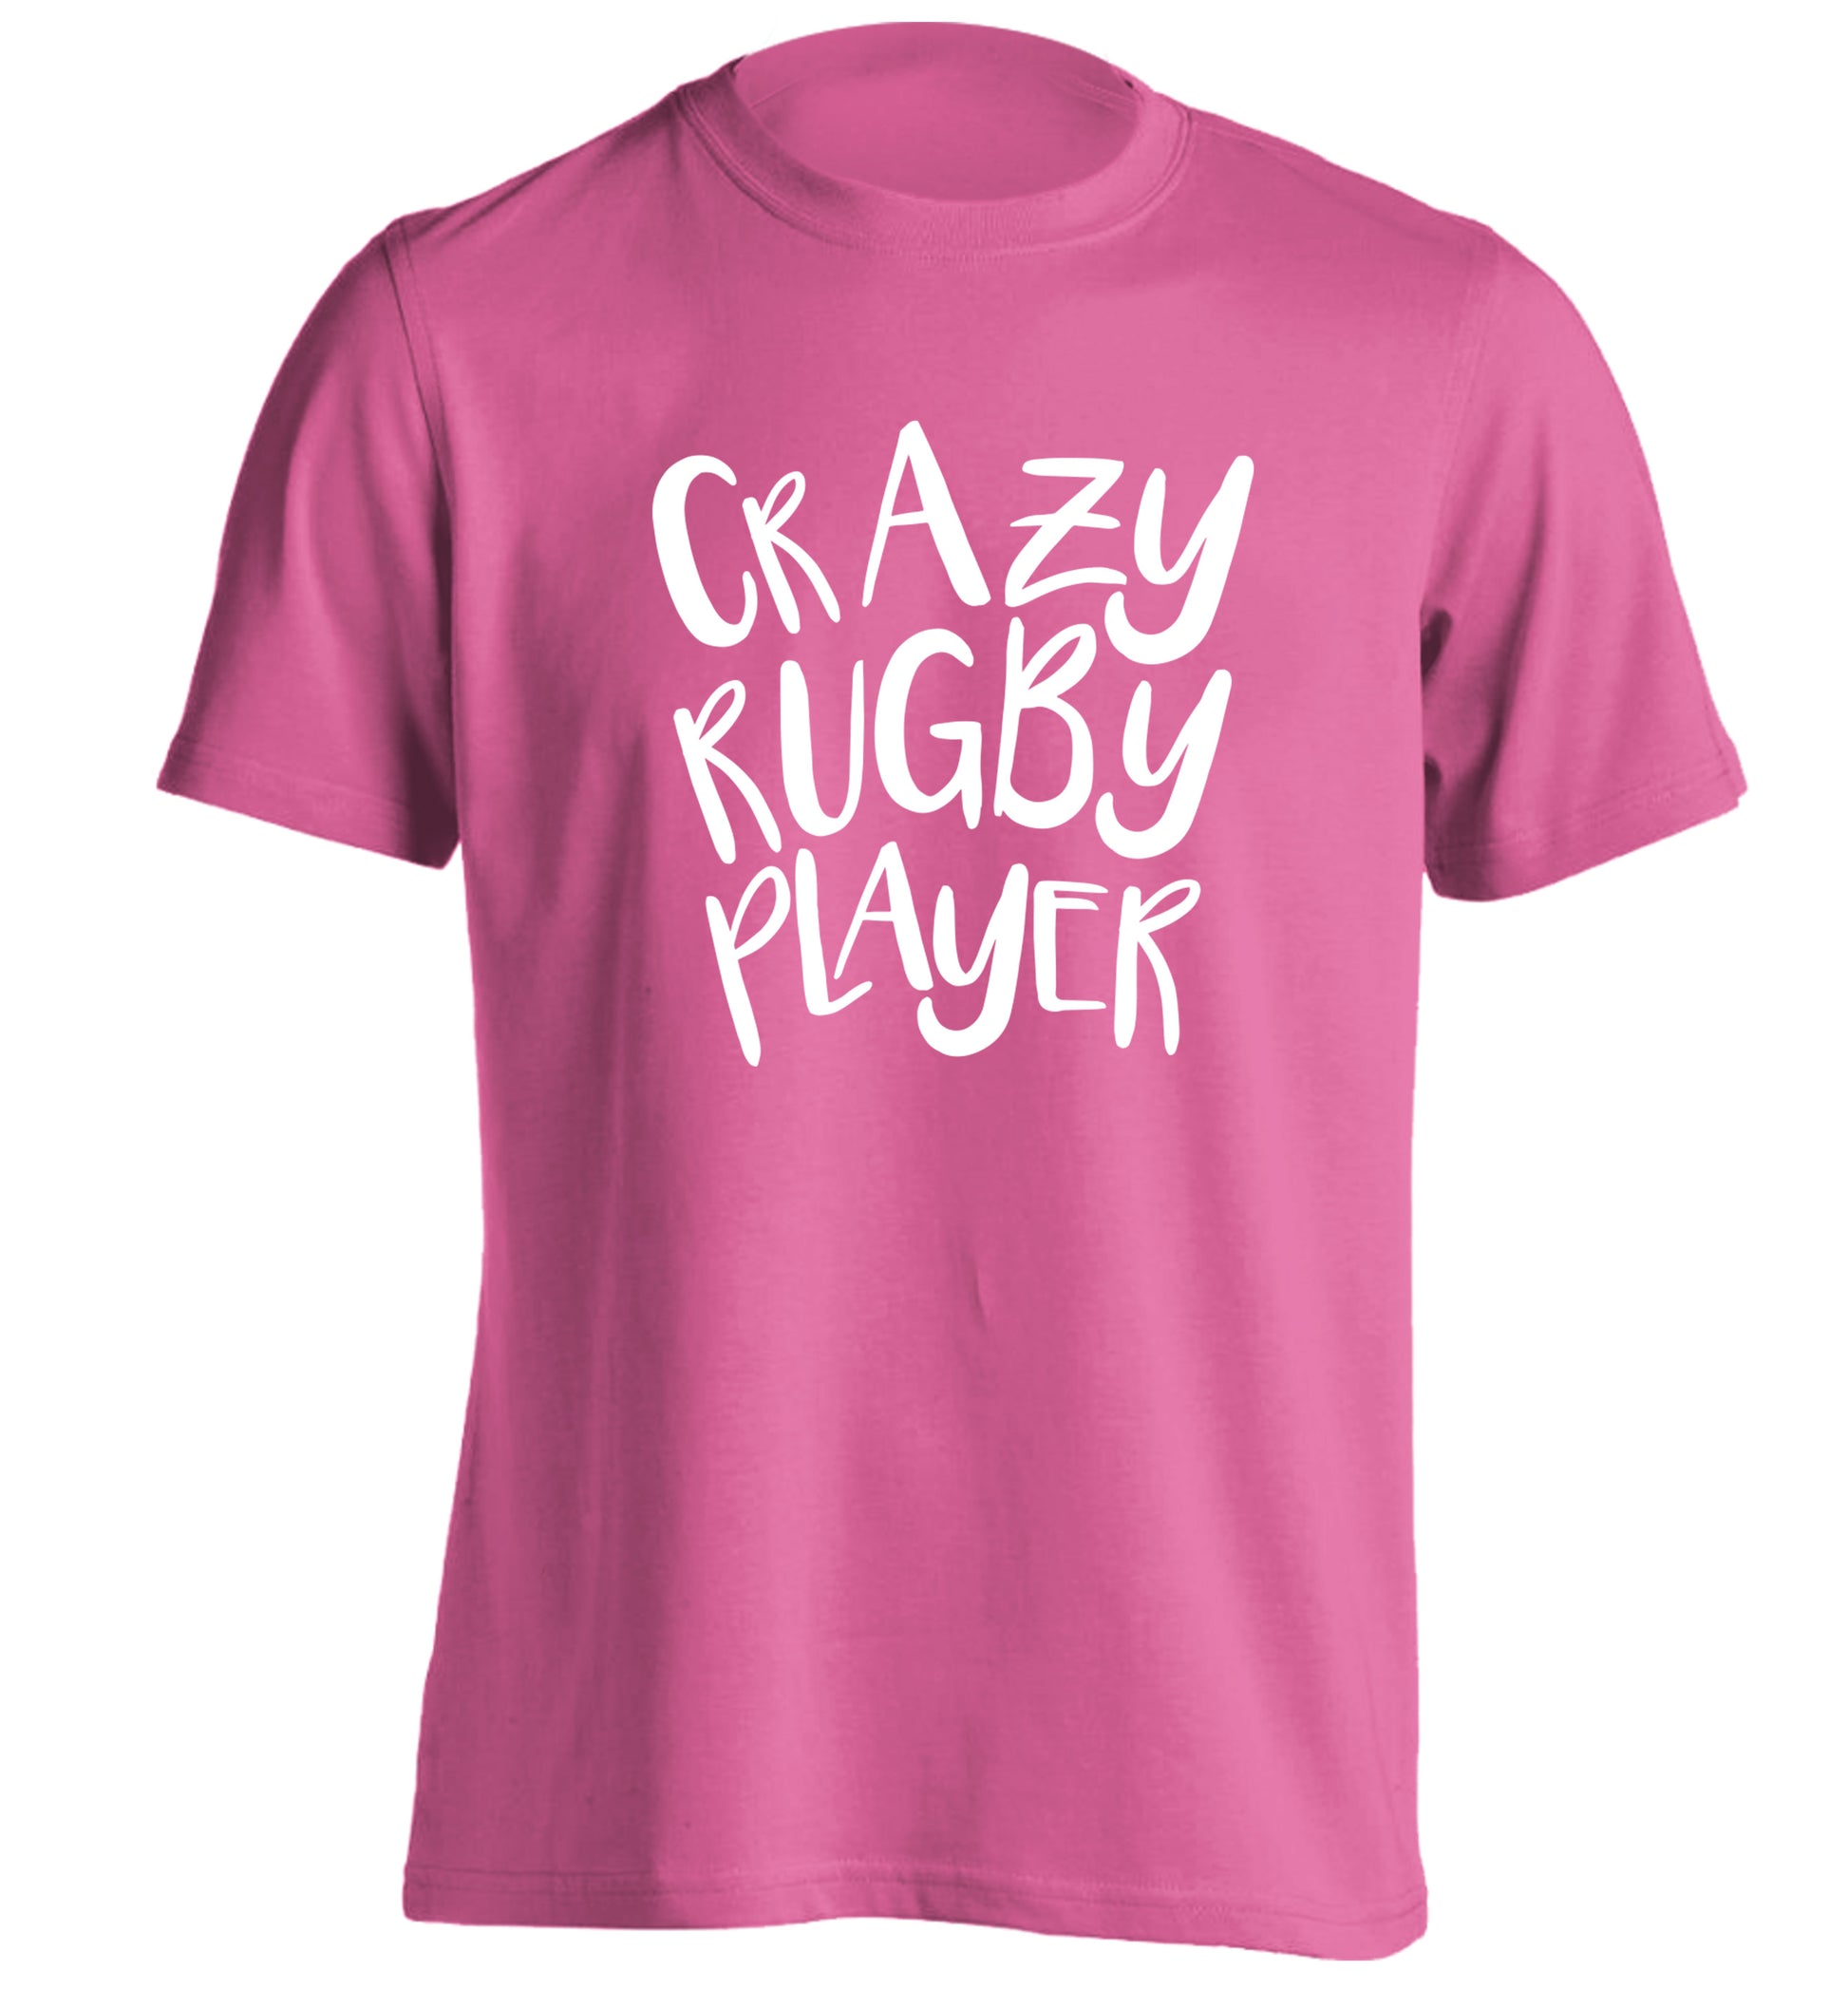 Crazy rugby player adults unisex pink Tshirt 2XL